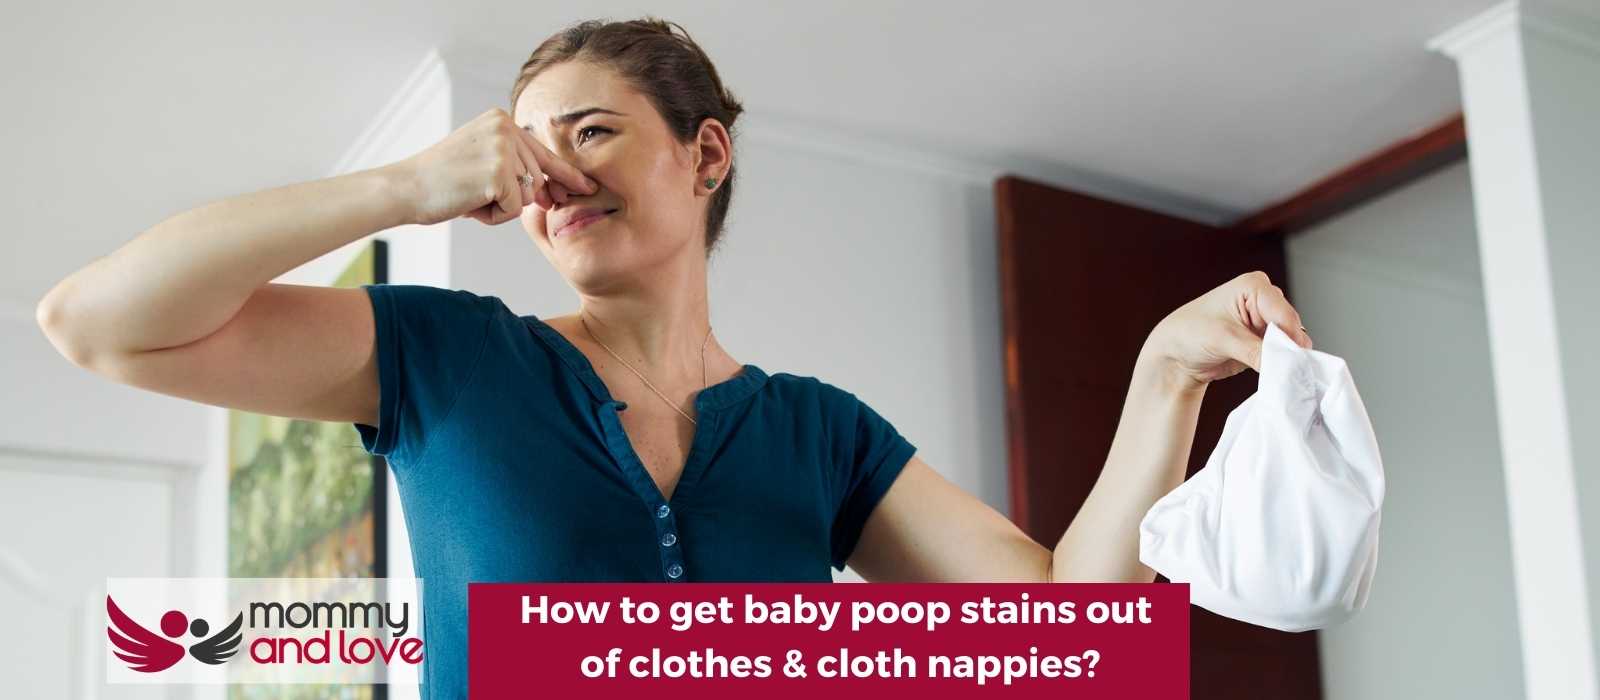 How to get baby poop stains out of clothes & cloth nappies